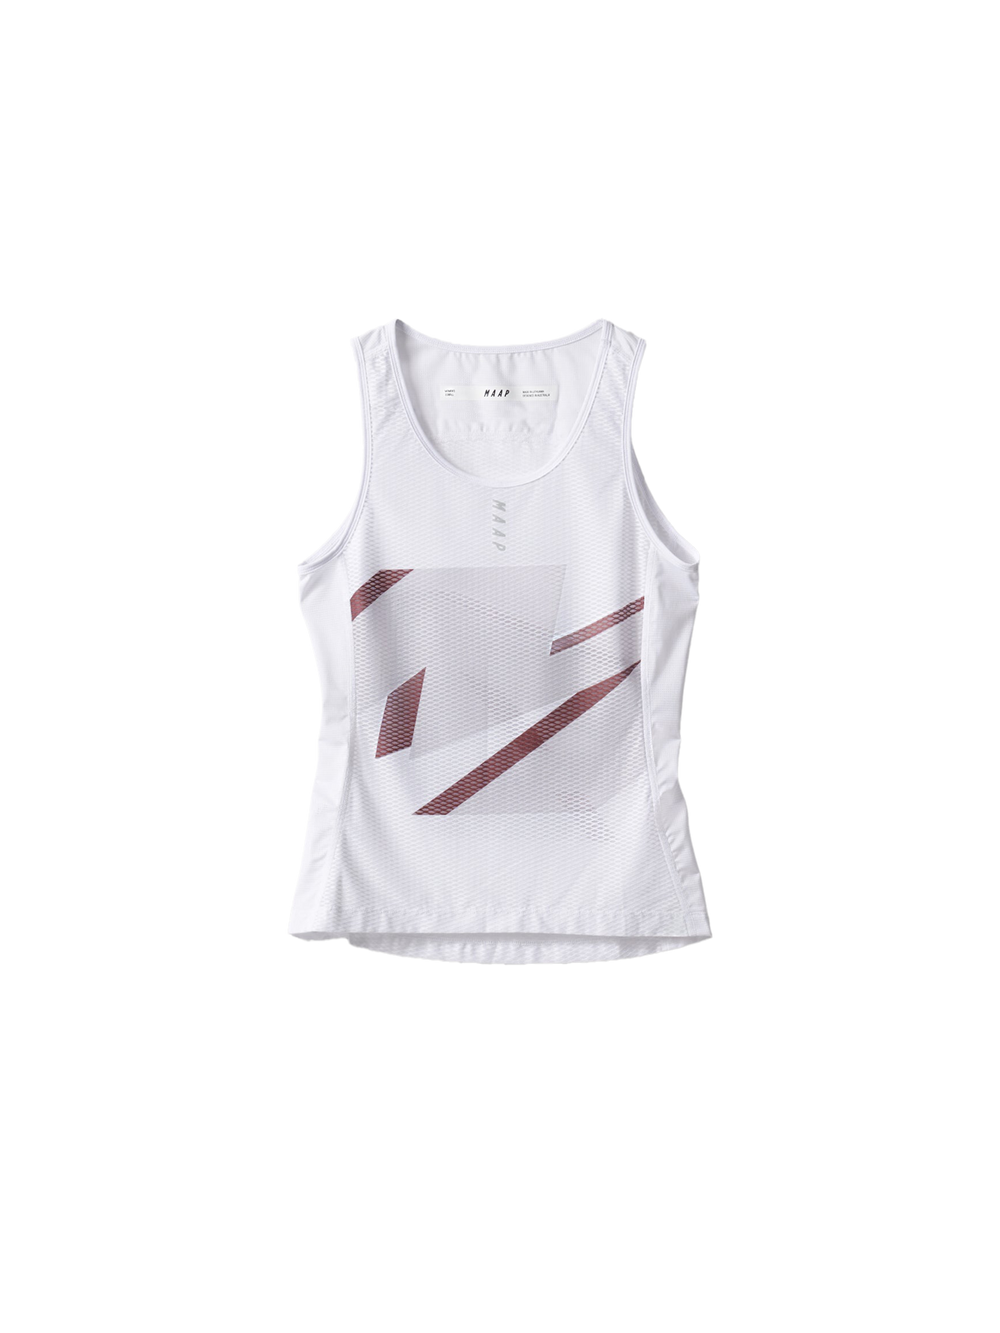 Product Image for Women's Evolve 3D Team Base Layer